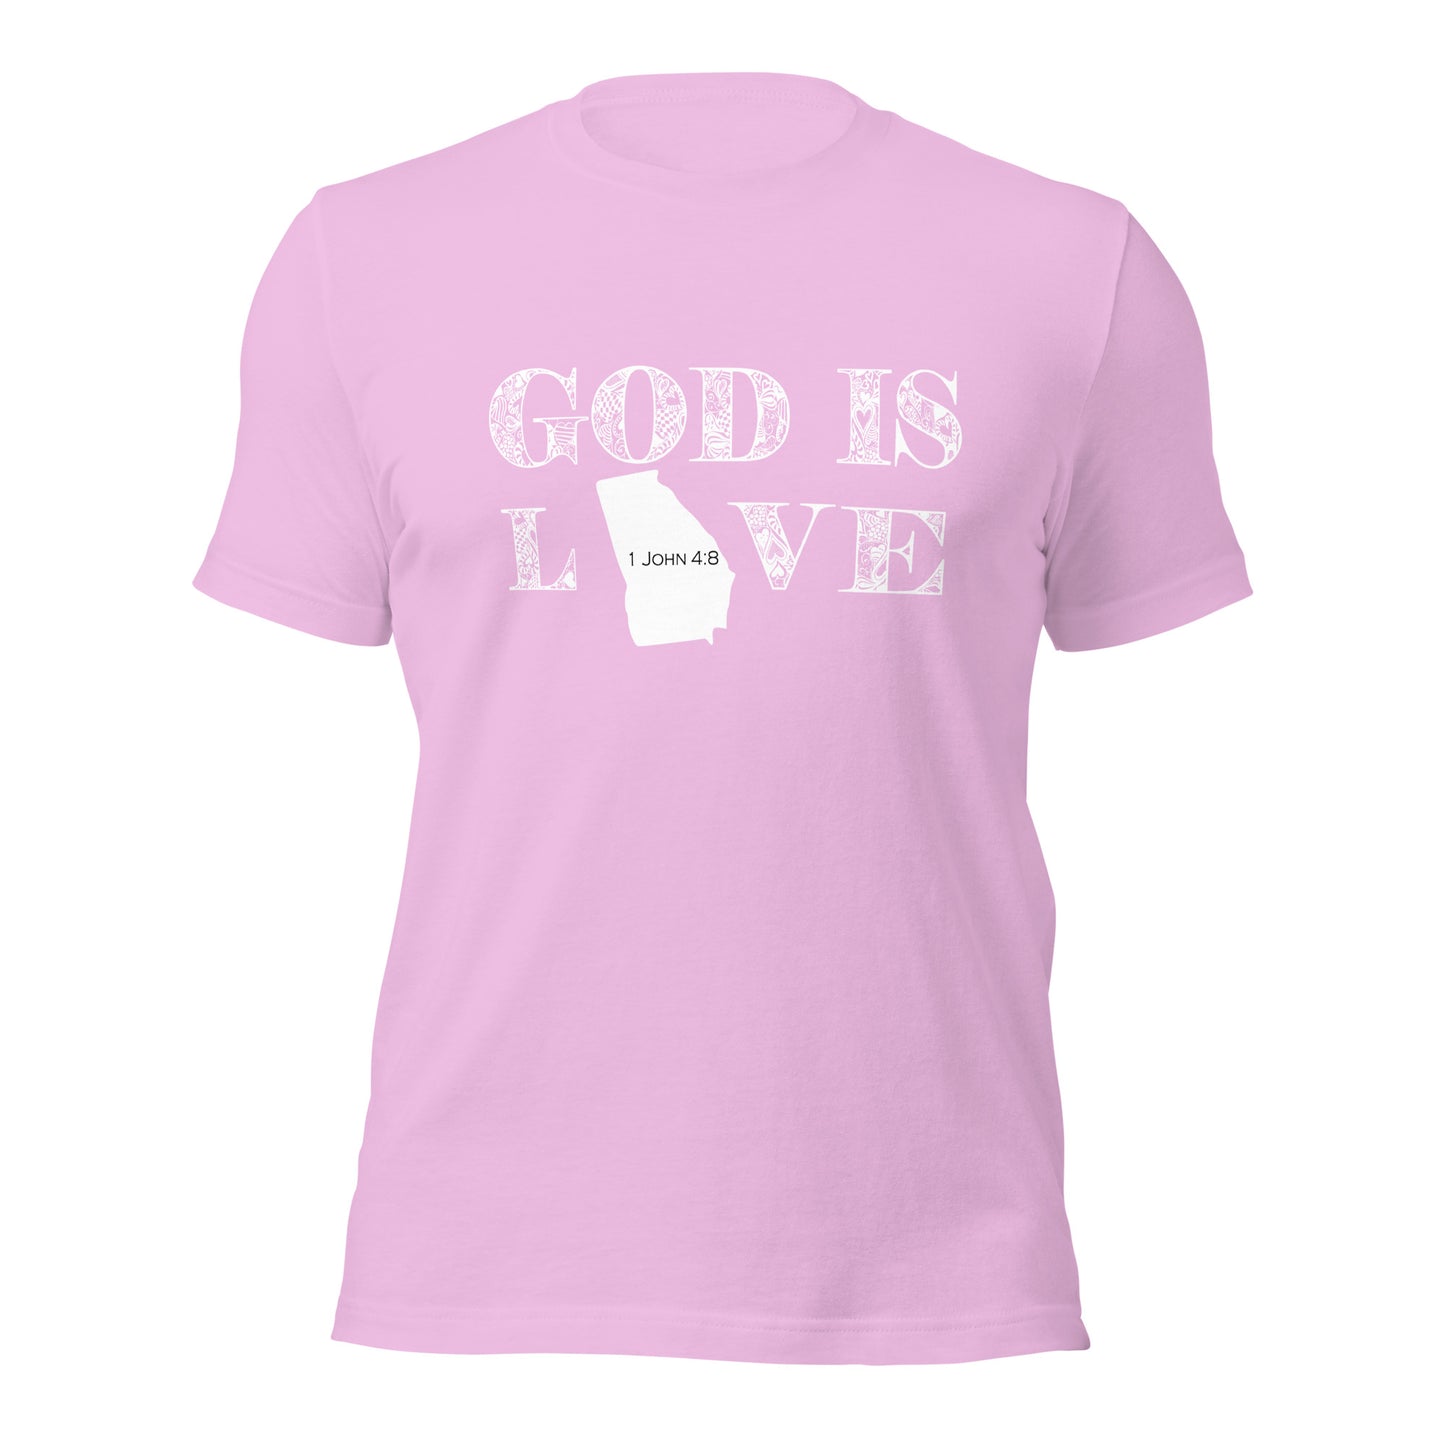 1 John 4:8 God is love Georgia T-shirt in Lilac - front view